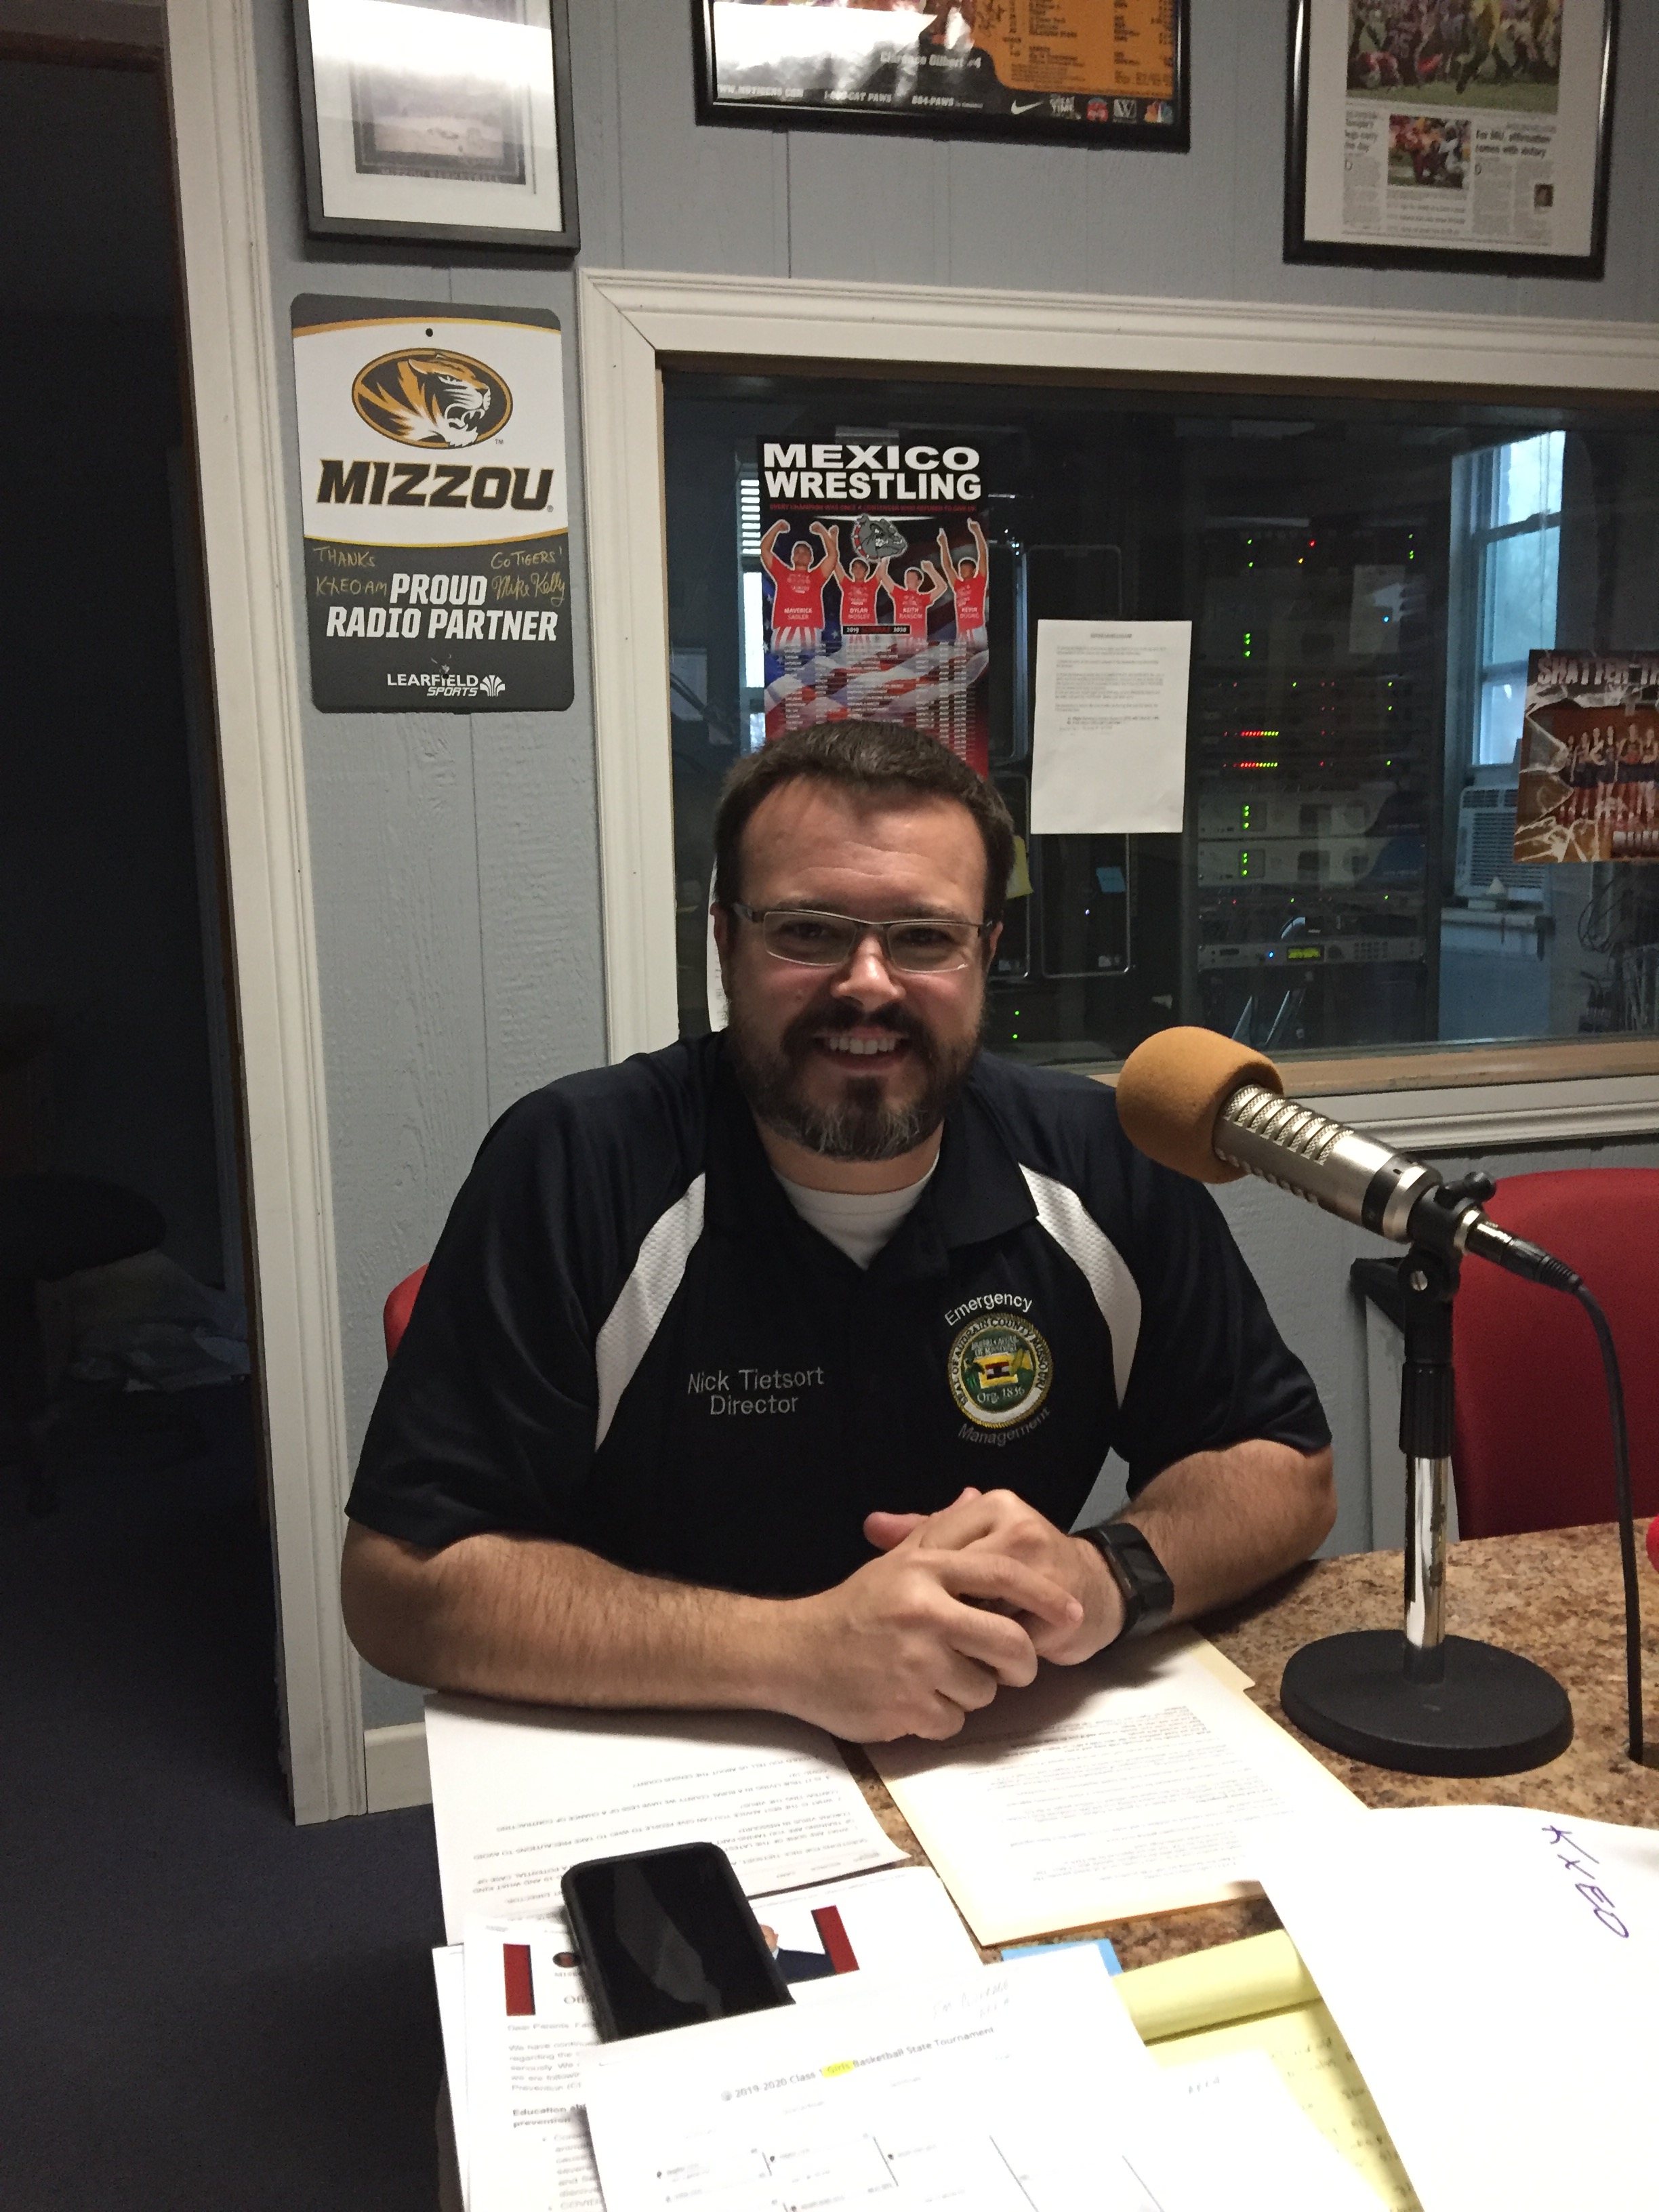 Audrain County Emergency Management Director Nicholas Tietsort On KXEO Local Talk Show Public Perspective